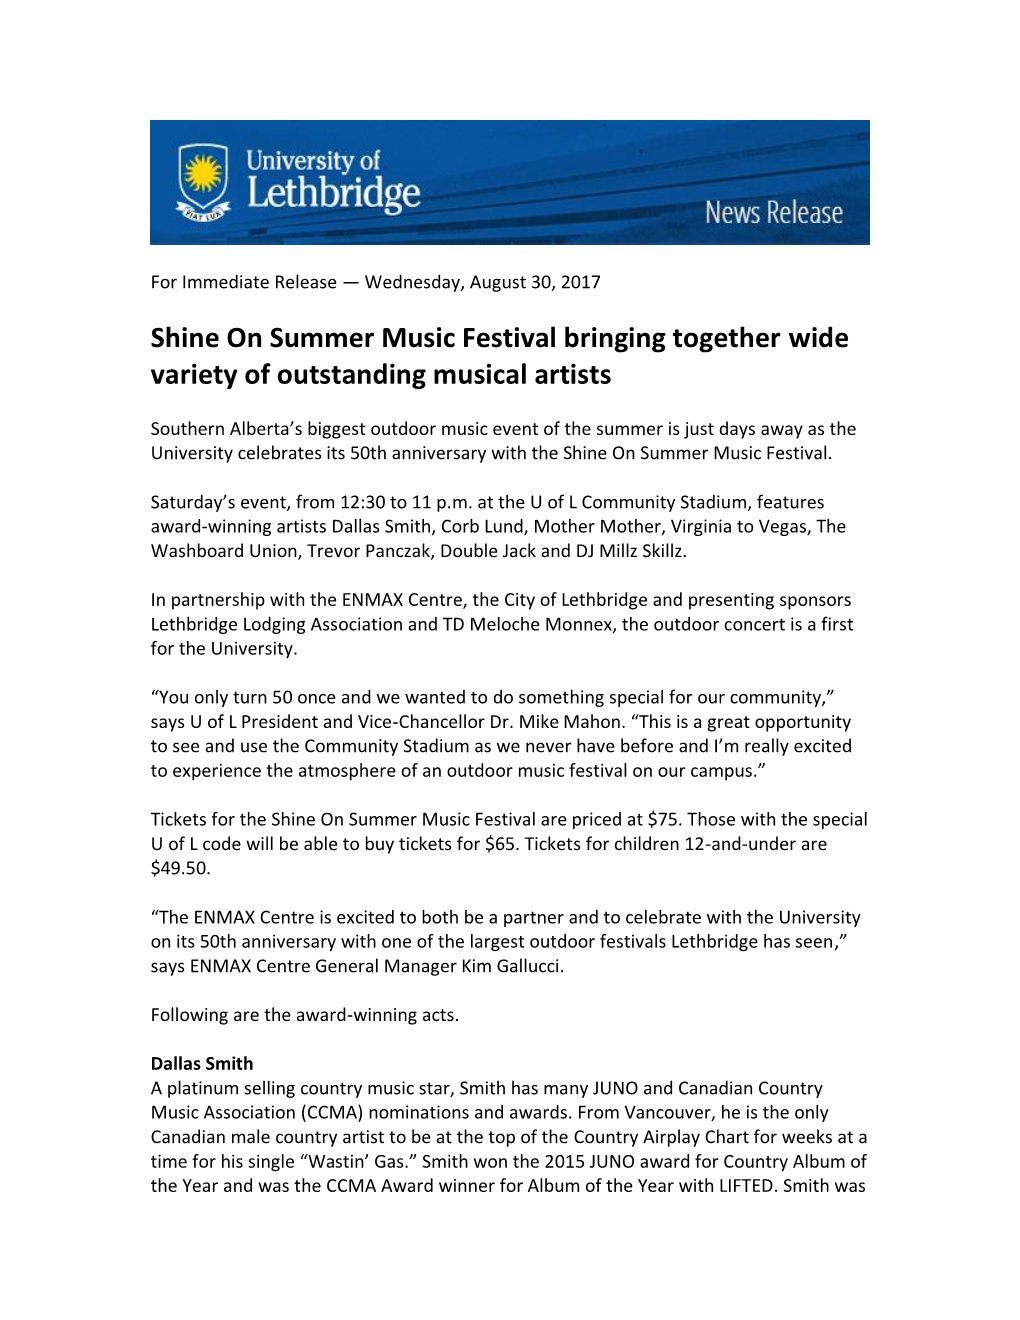 Shine on Summer Music Festival Bringing Together Wide Variety of Outstanding Musical Artists